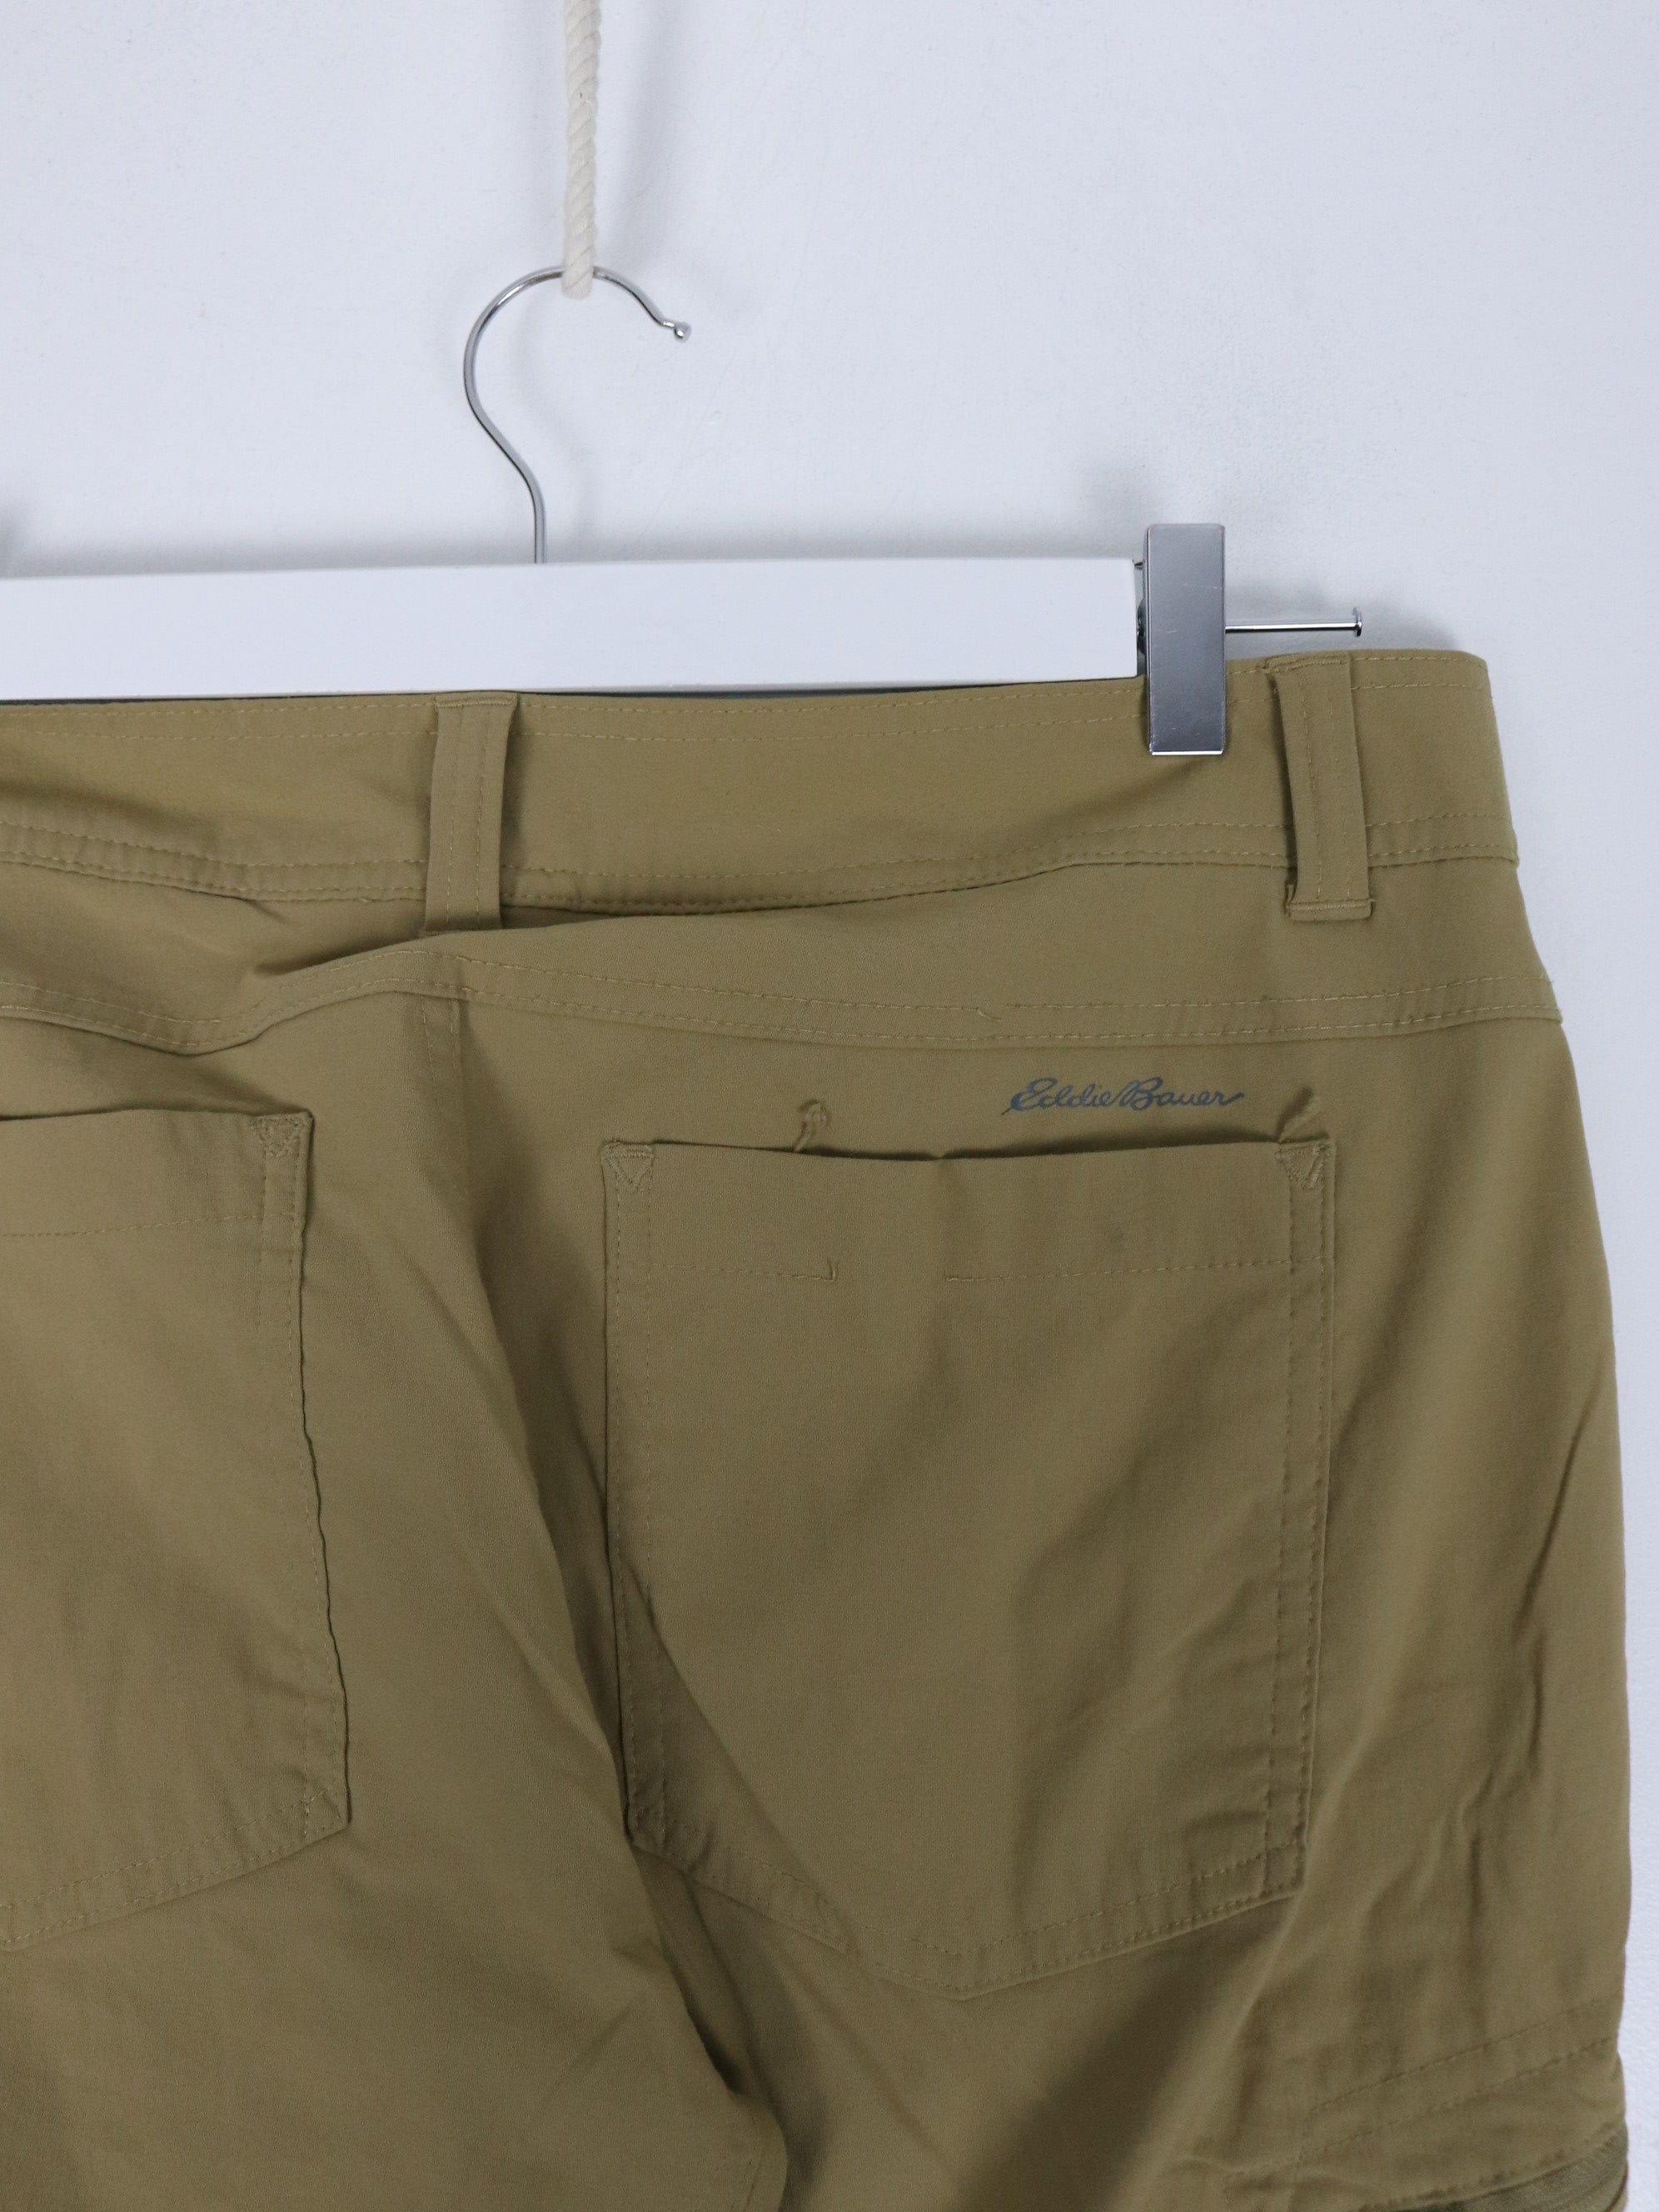 Eddie Bauer Pants Mens 34 x 32 Brown Hiking Outdoors First Ascent